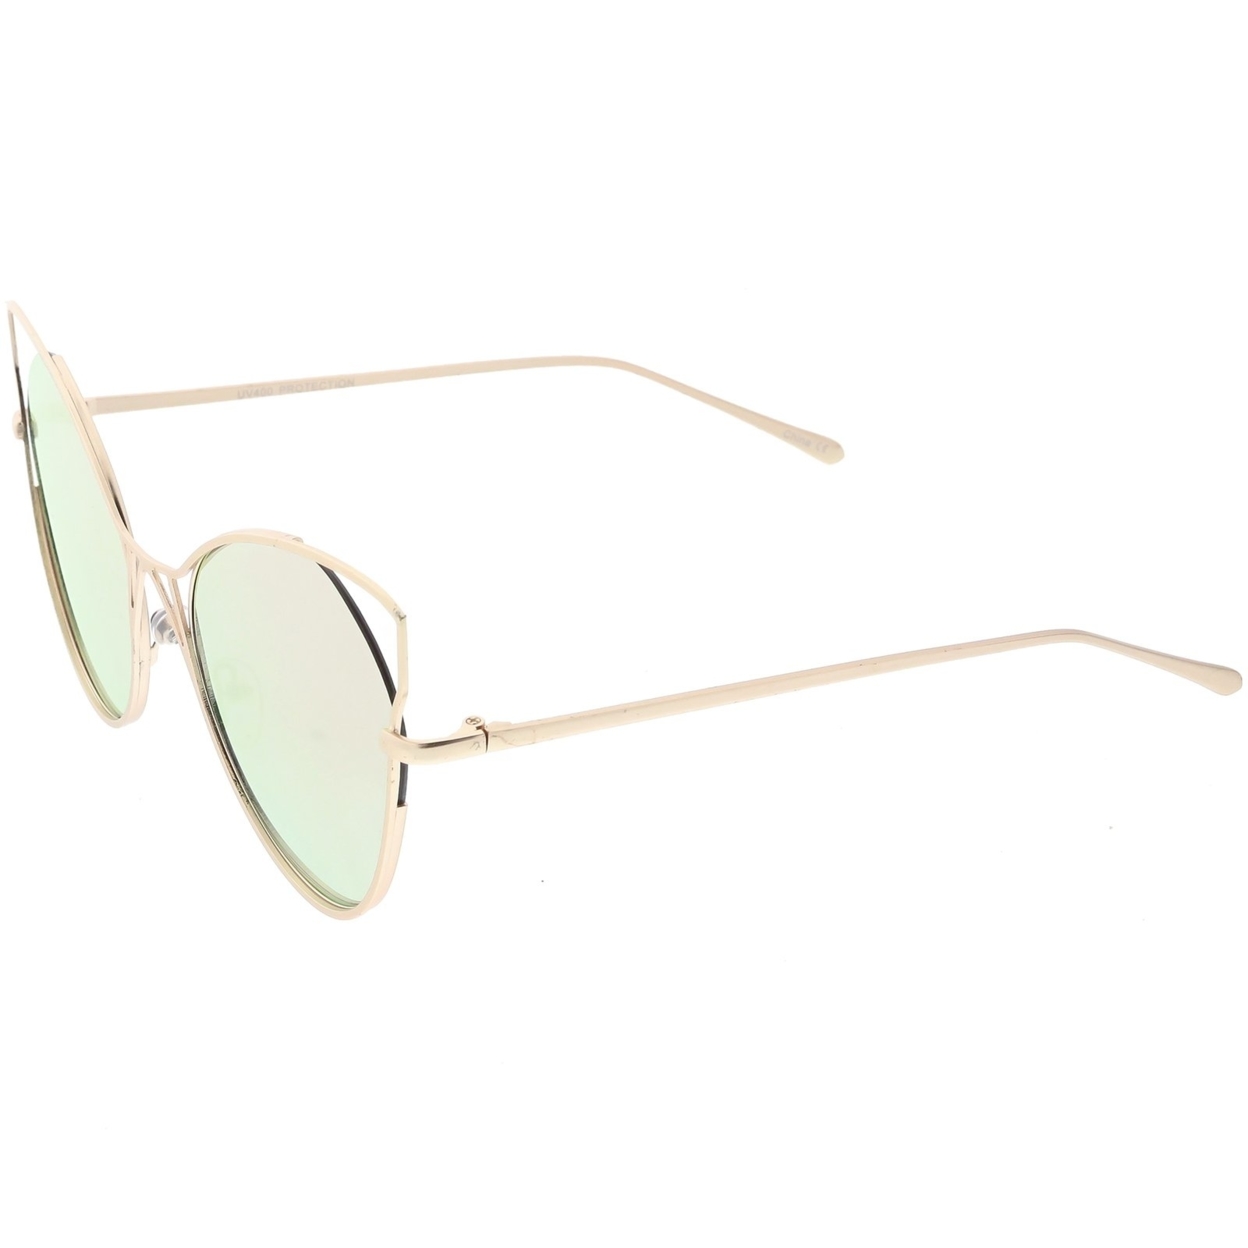 Oversize Cat Eye Sunglasses Semi Rimless Metal Cut Out Mirrored Flat Lens 60mm - Silver / Pink Mirror